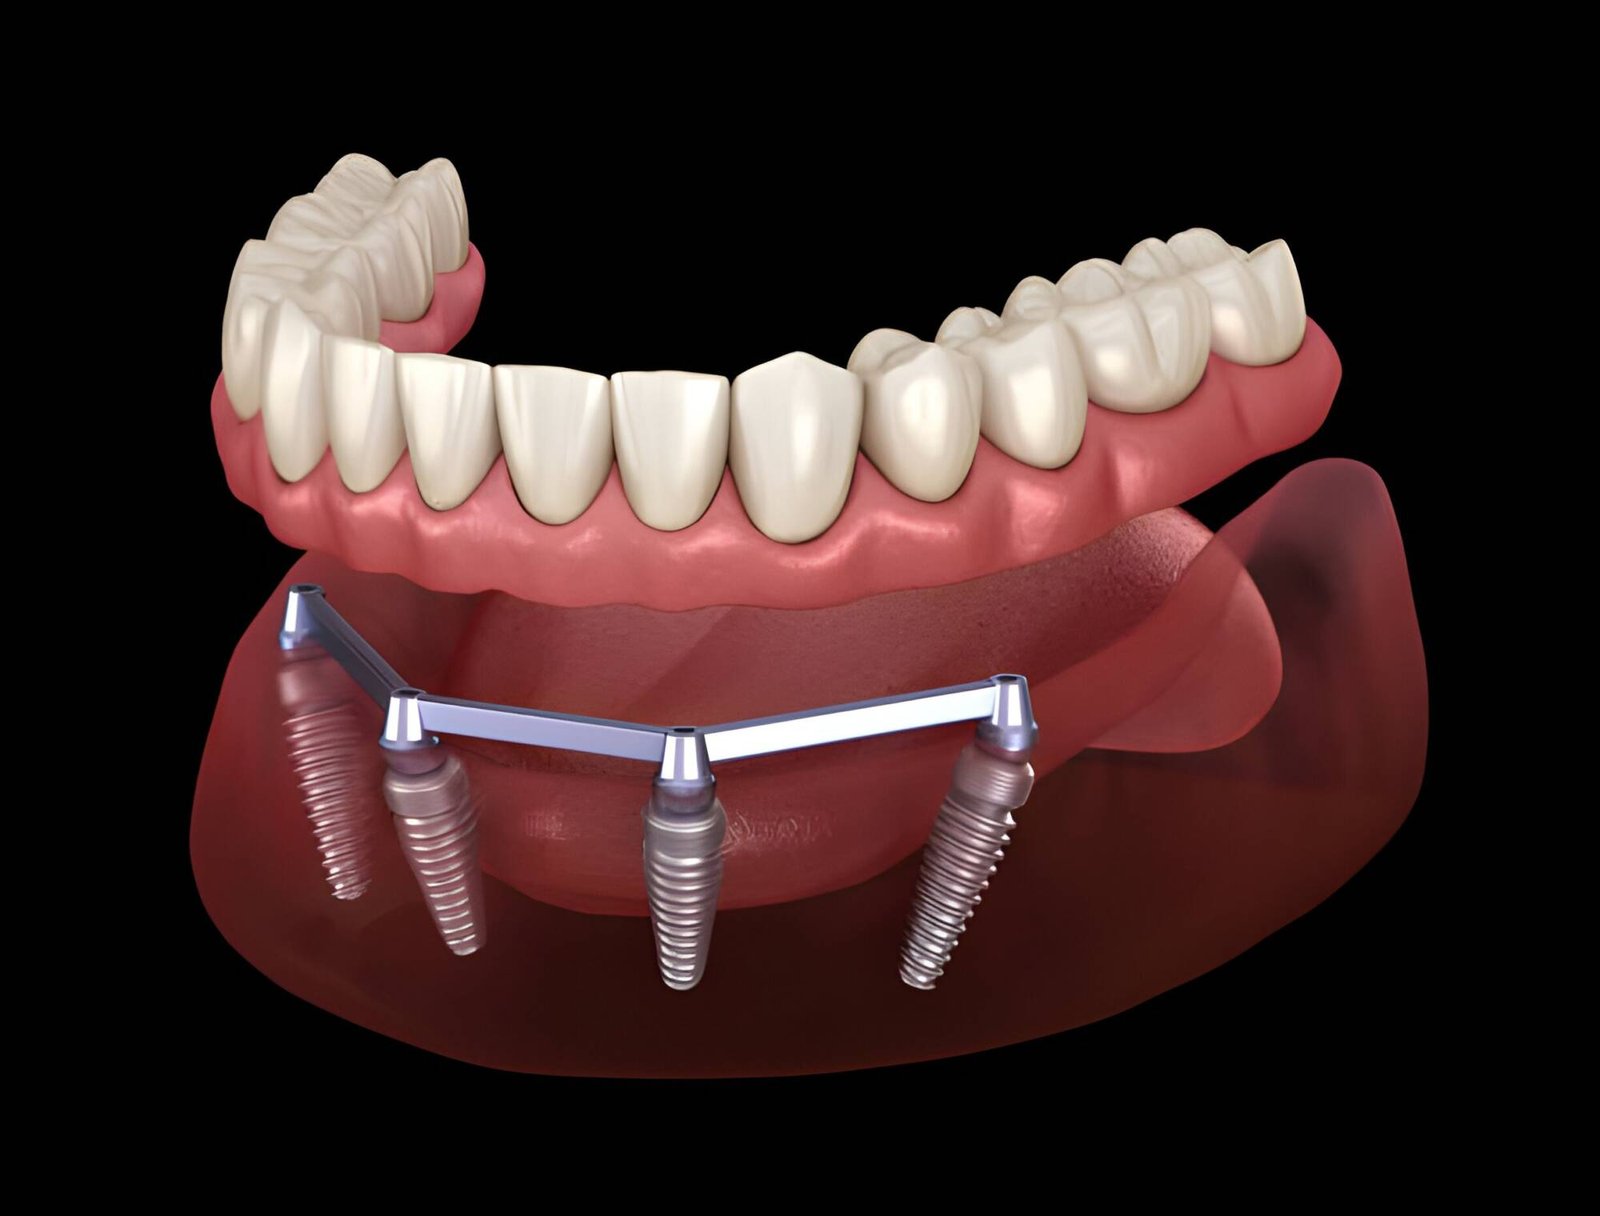 How much is all-on-4 dental implants UK?